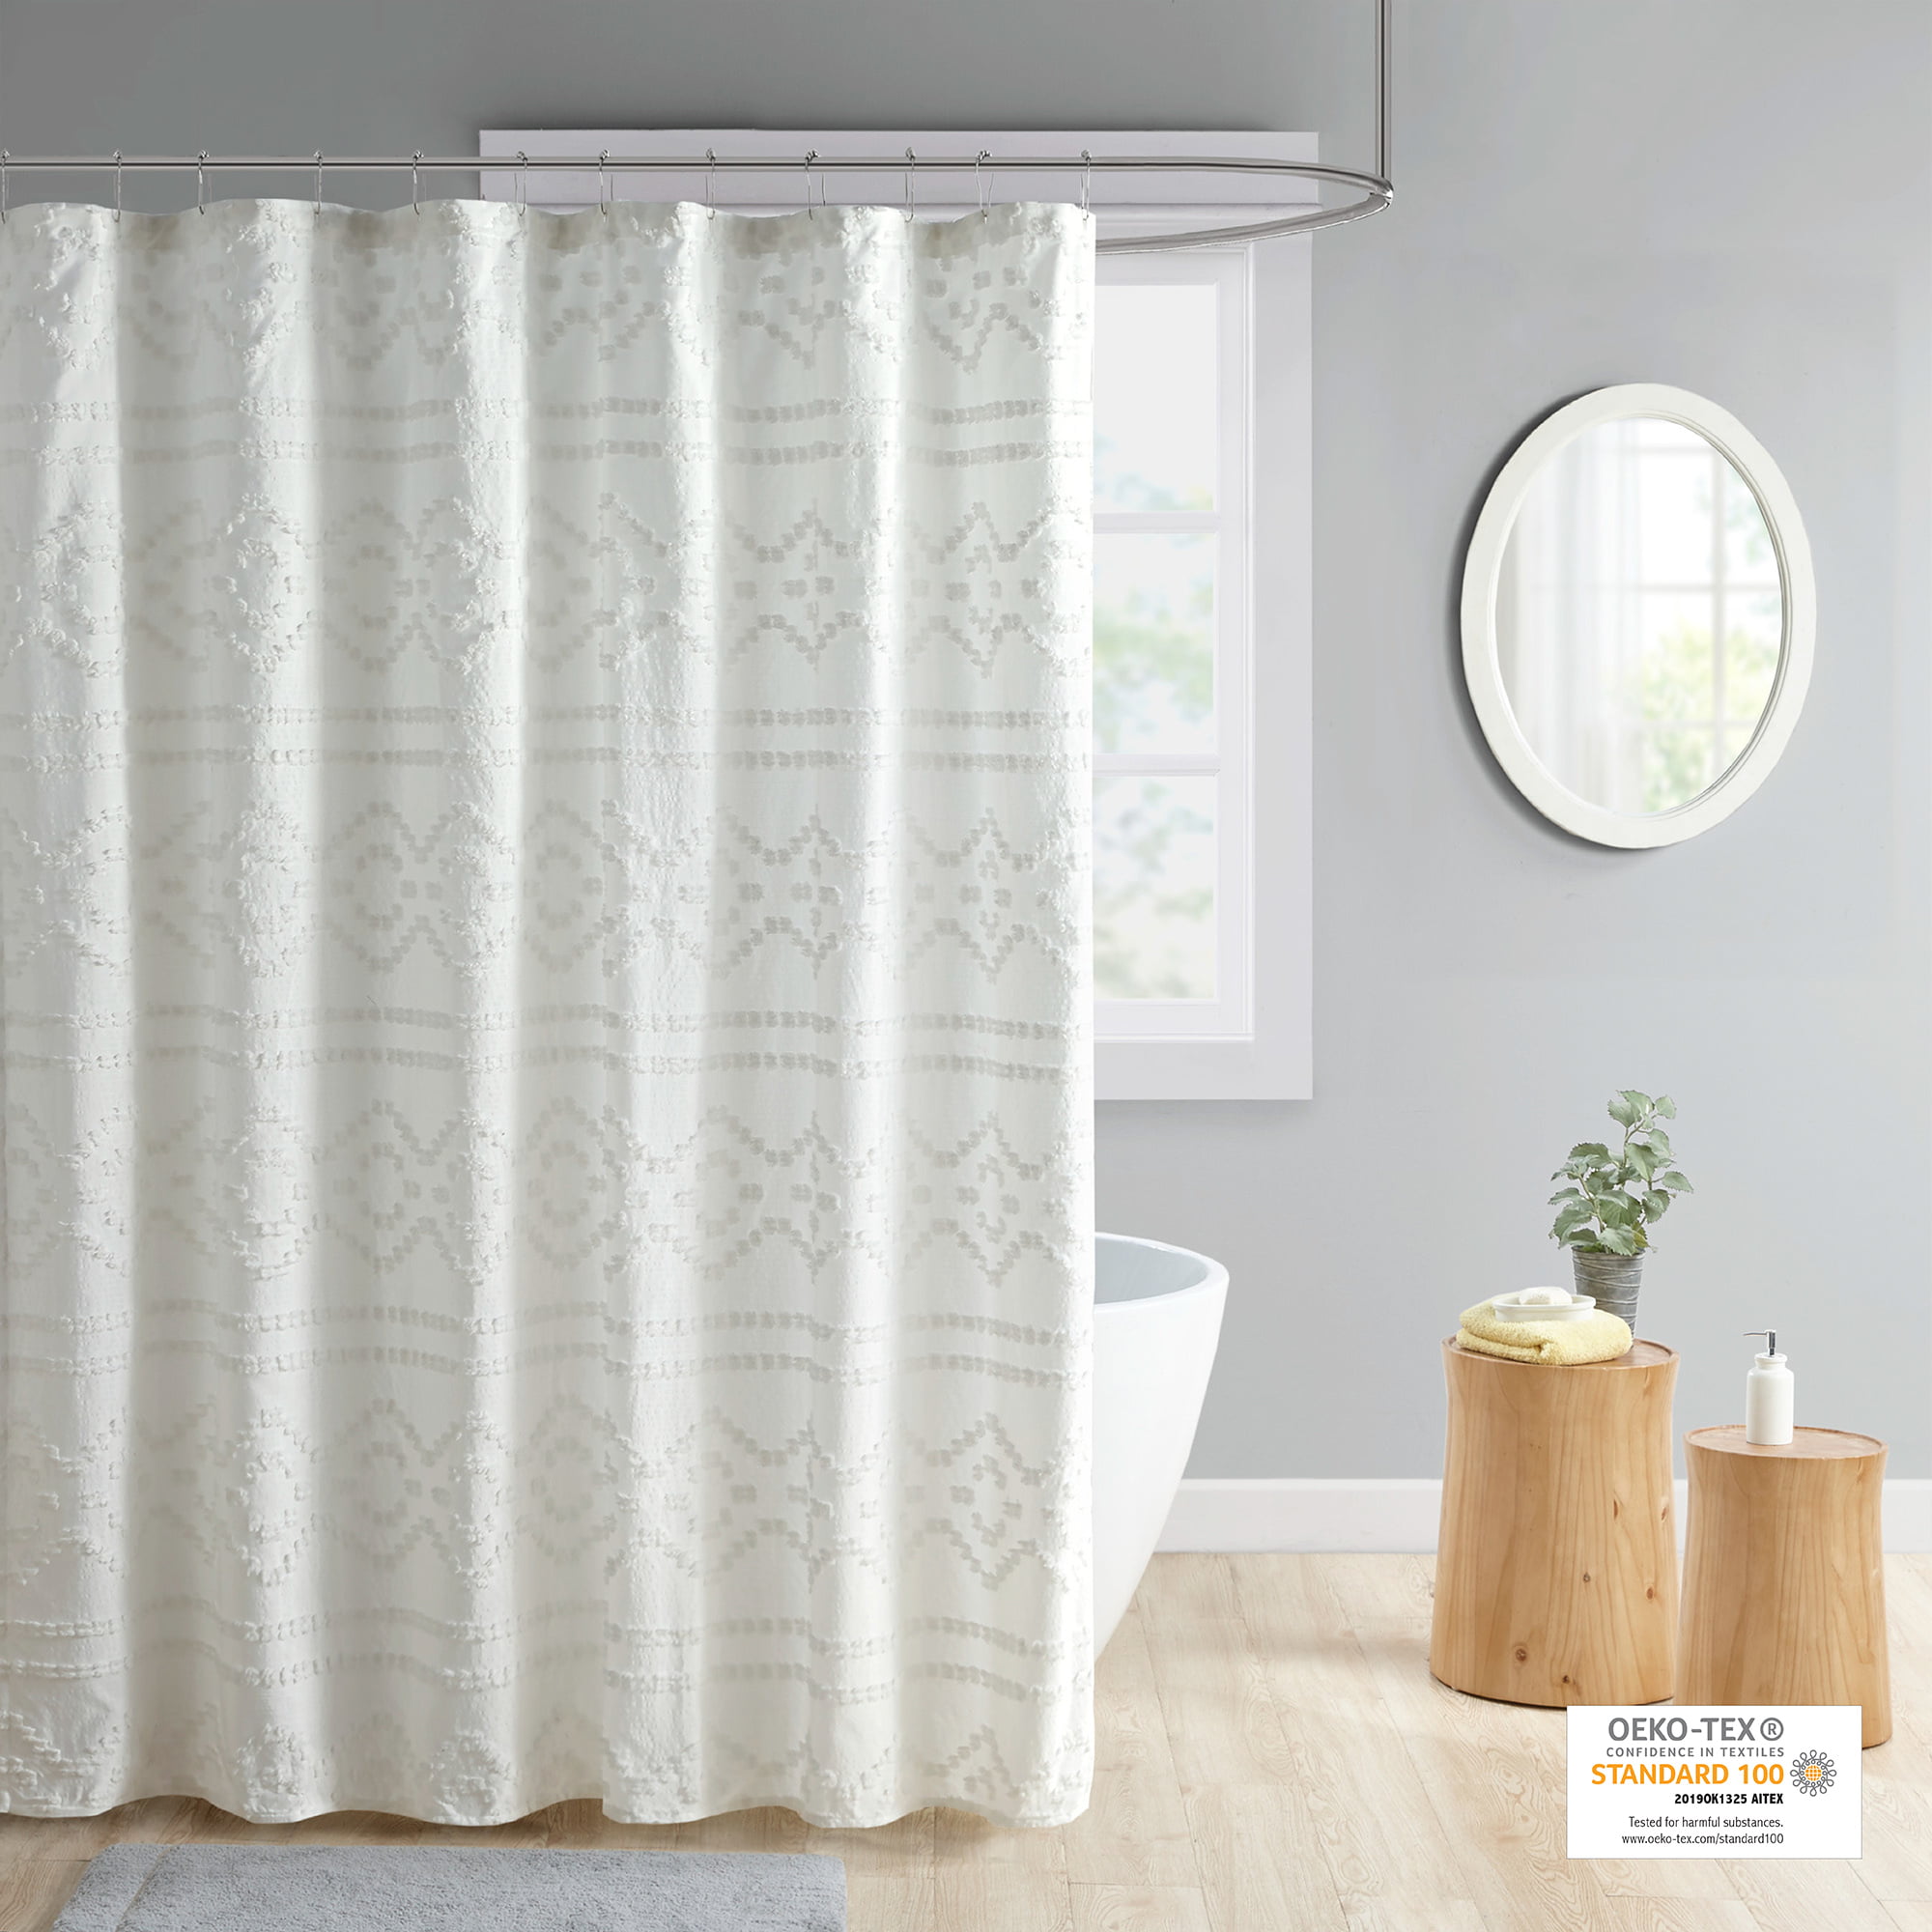 "Florentine Scroll" by Designables Details about   Fabric Shower Curtain 70x72 178x183cm 